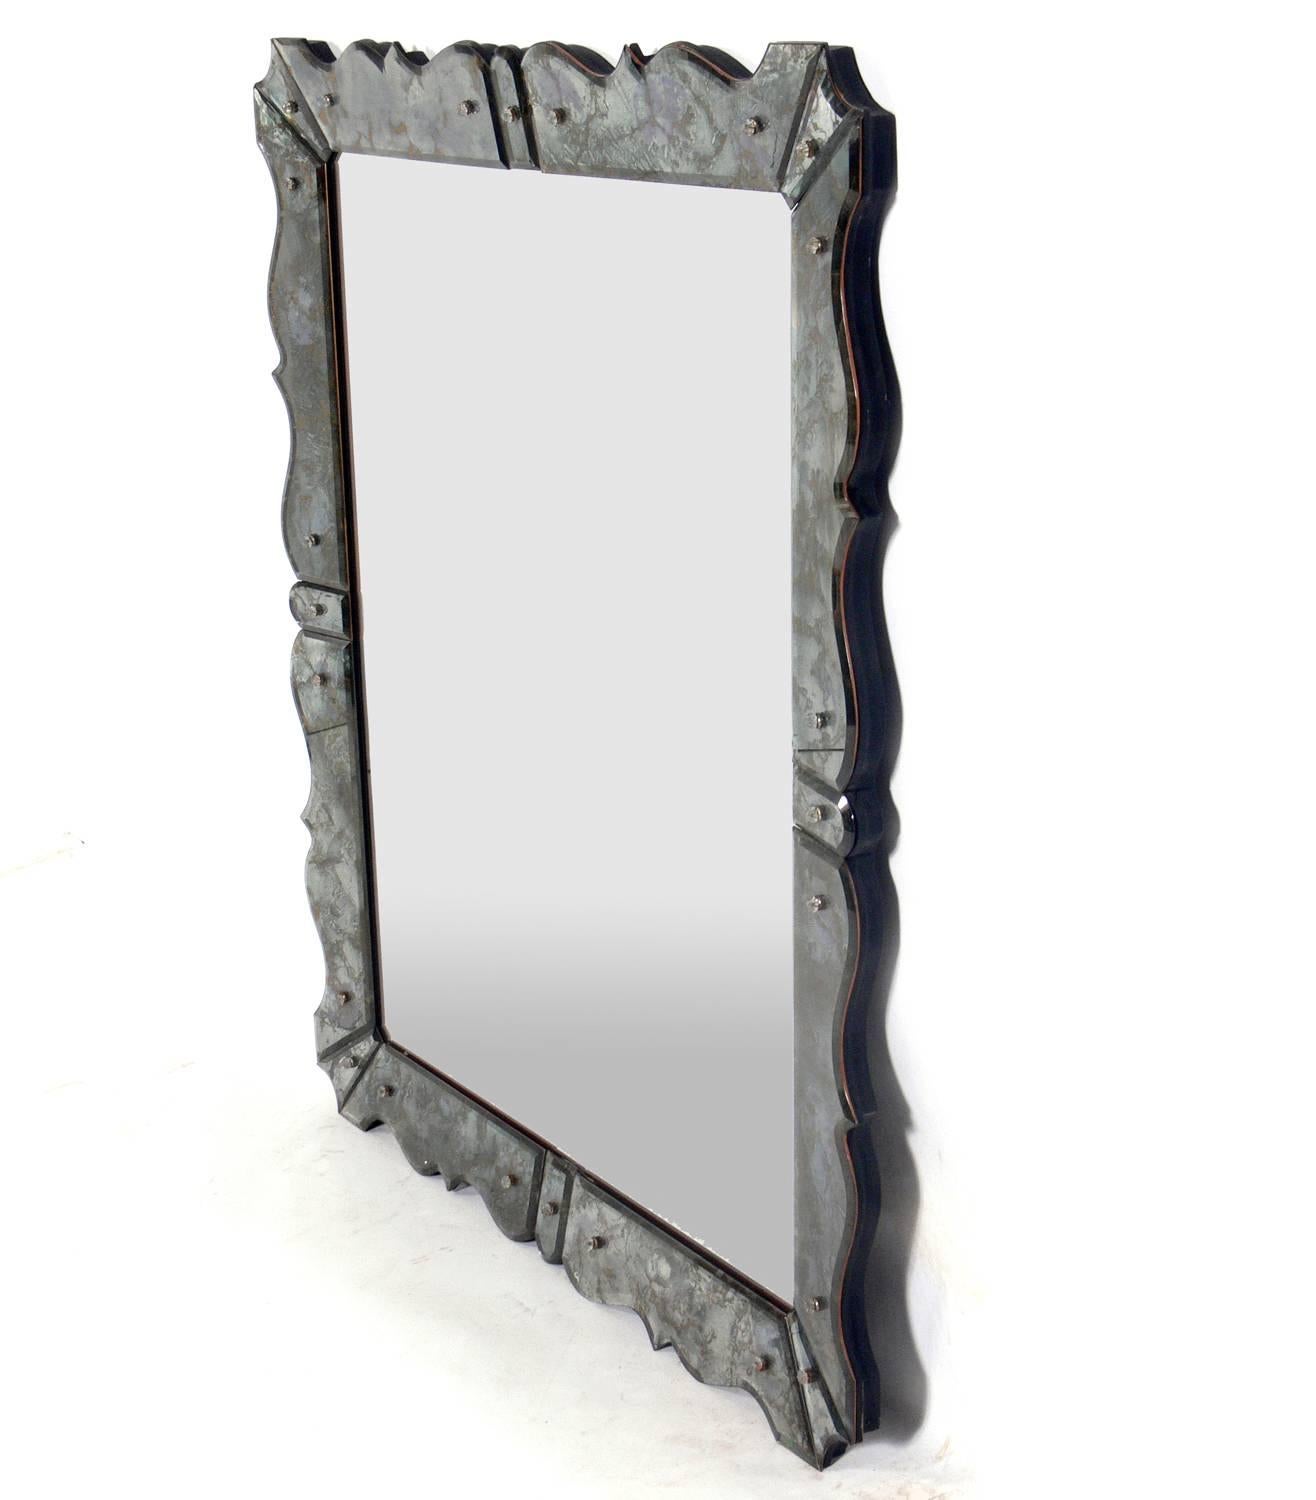 Glamorous scalloped mirror in the manner of Serge Roche, probably American, circa 1950s. Both the marbleized scalloped mirror edging and centre mirror are original and retain their warm original patina.